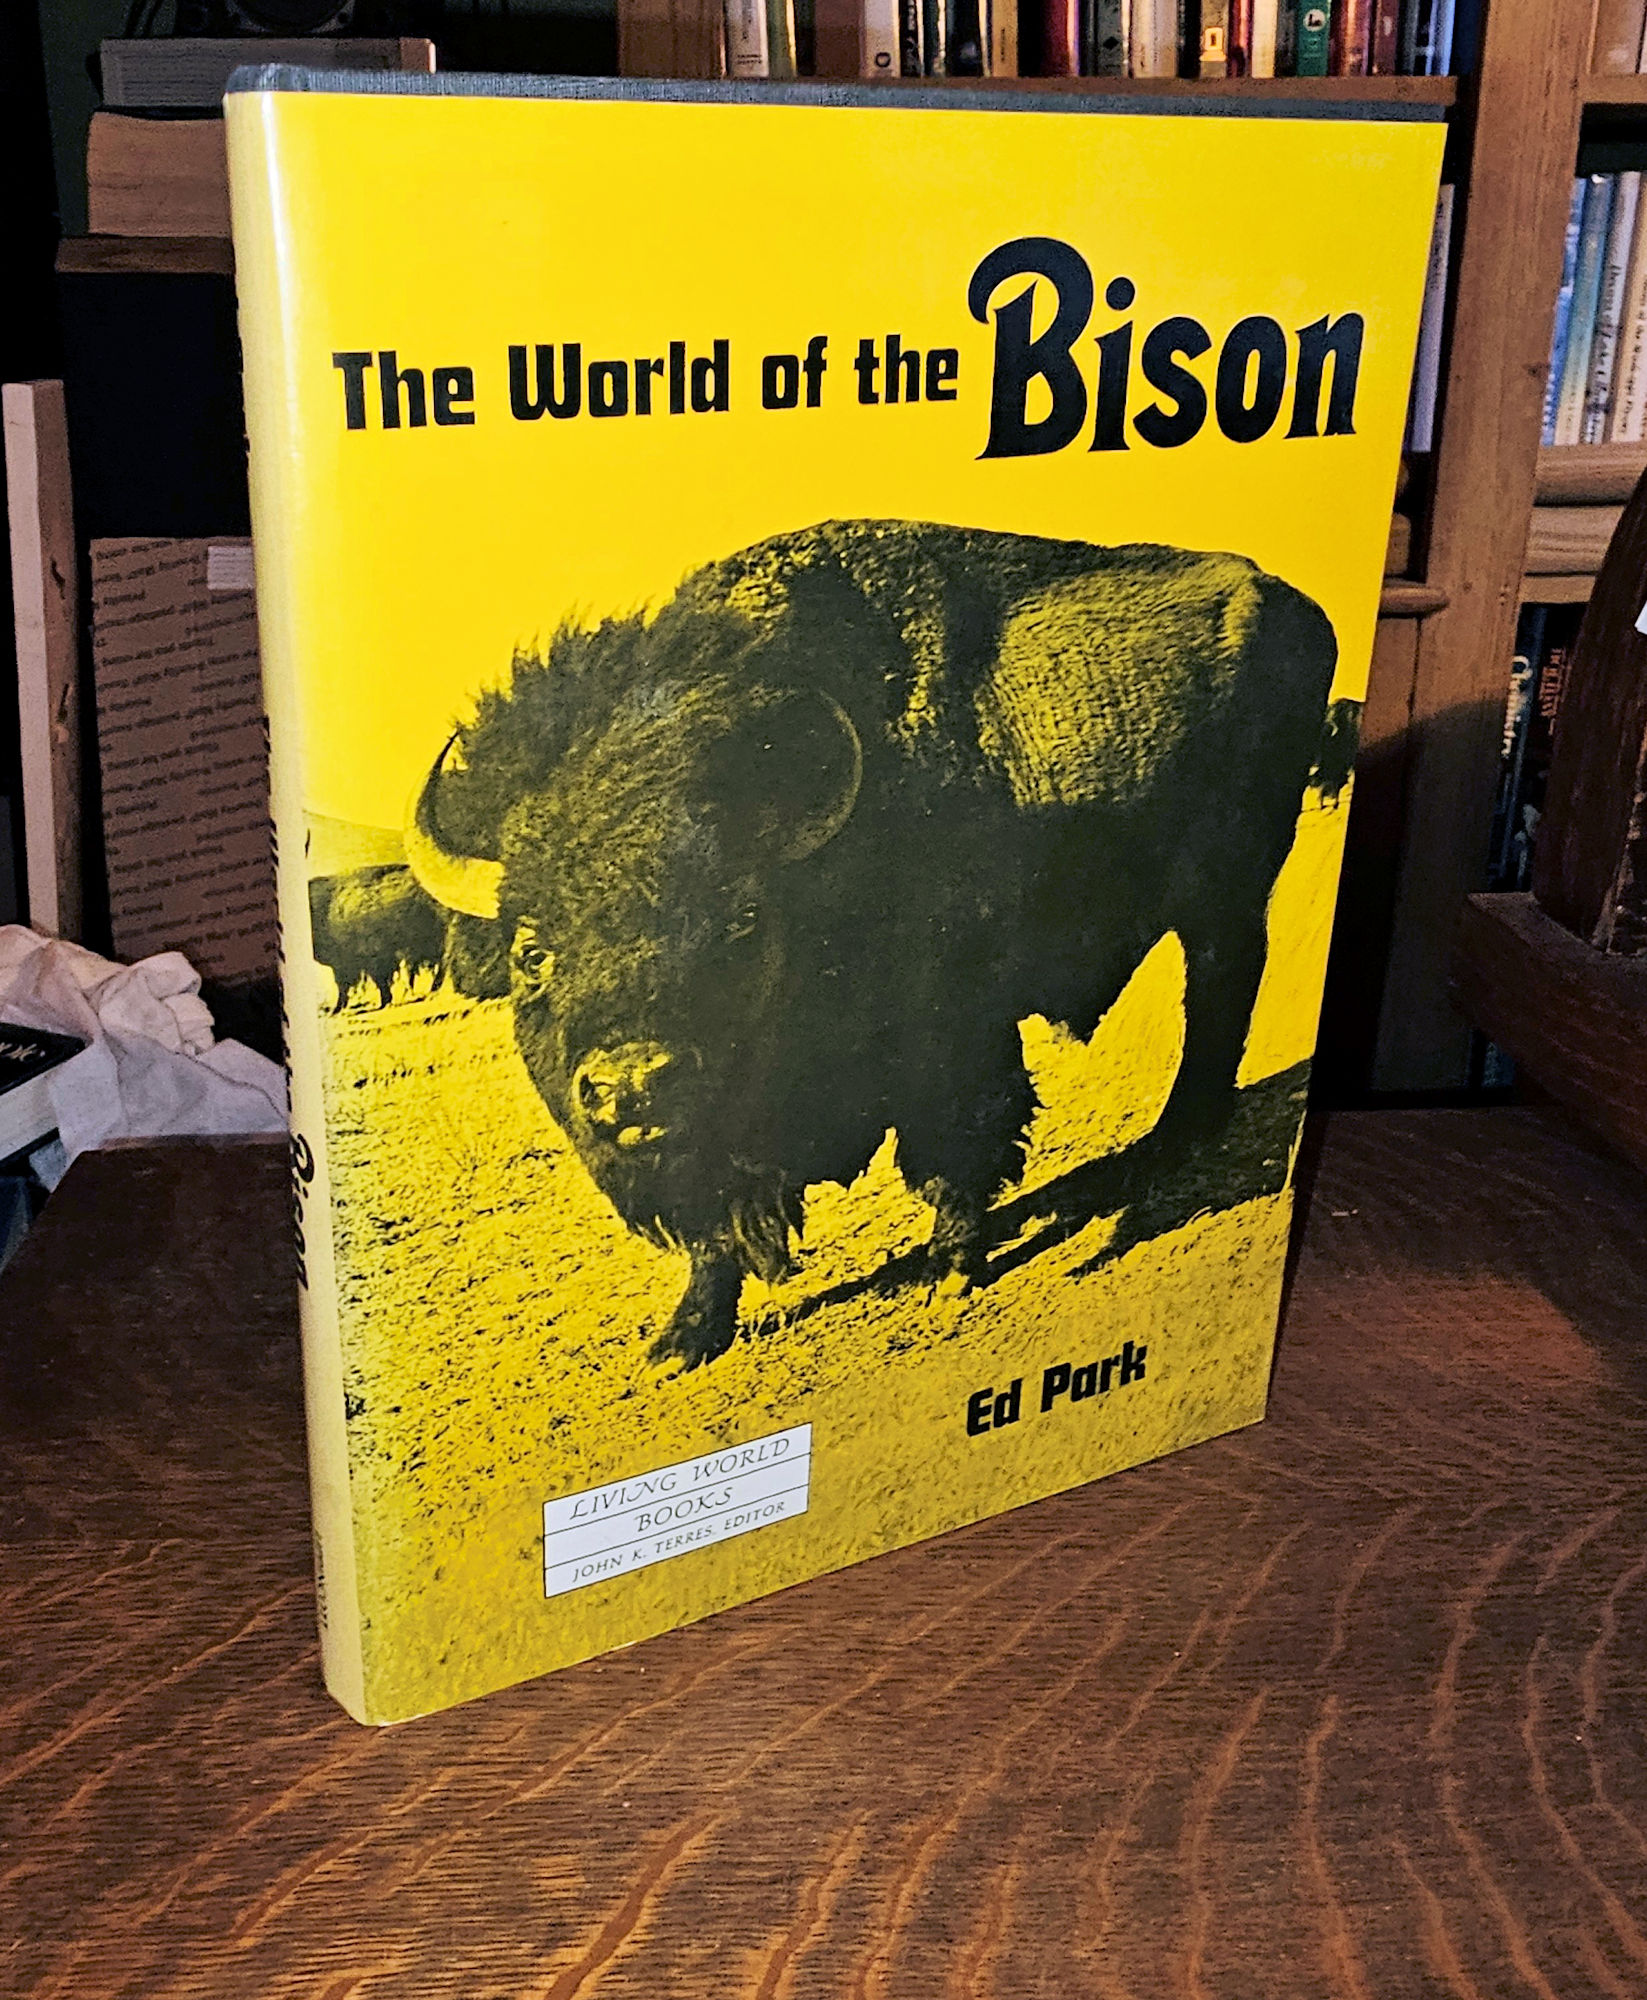 The World of the Bison by Ed Park, 1969
                        First Ed.